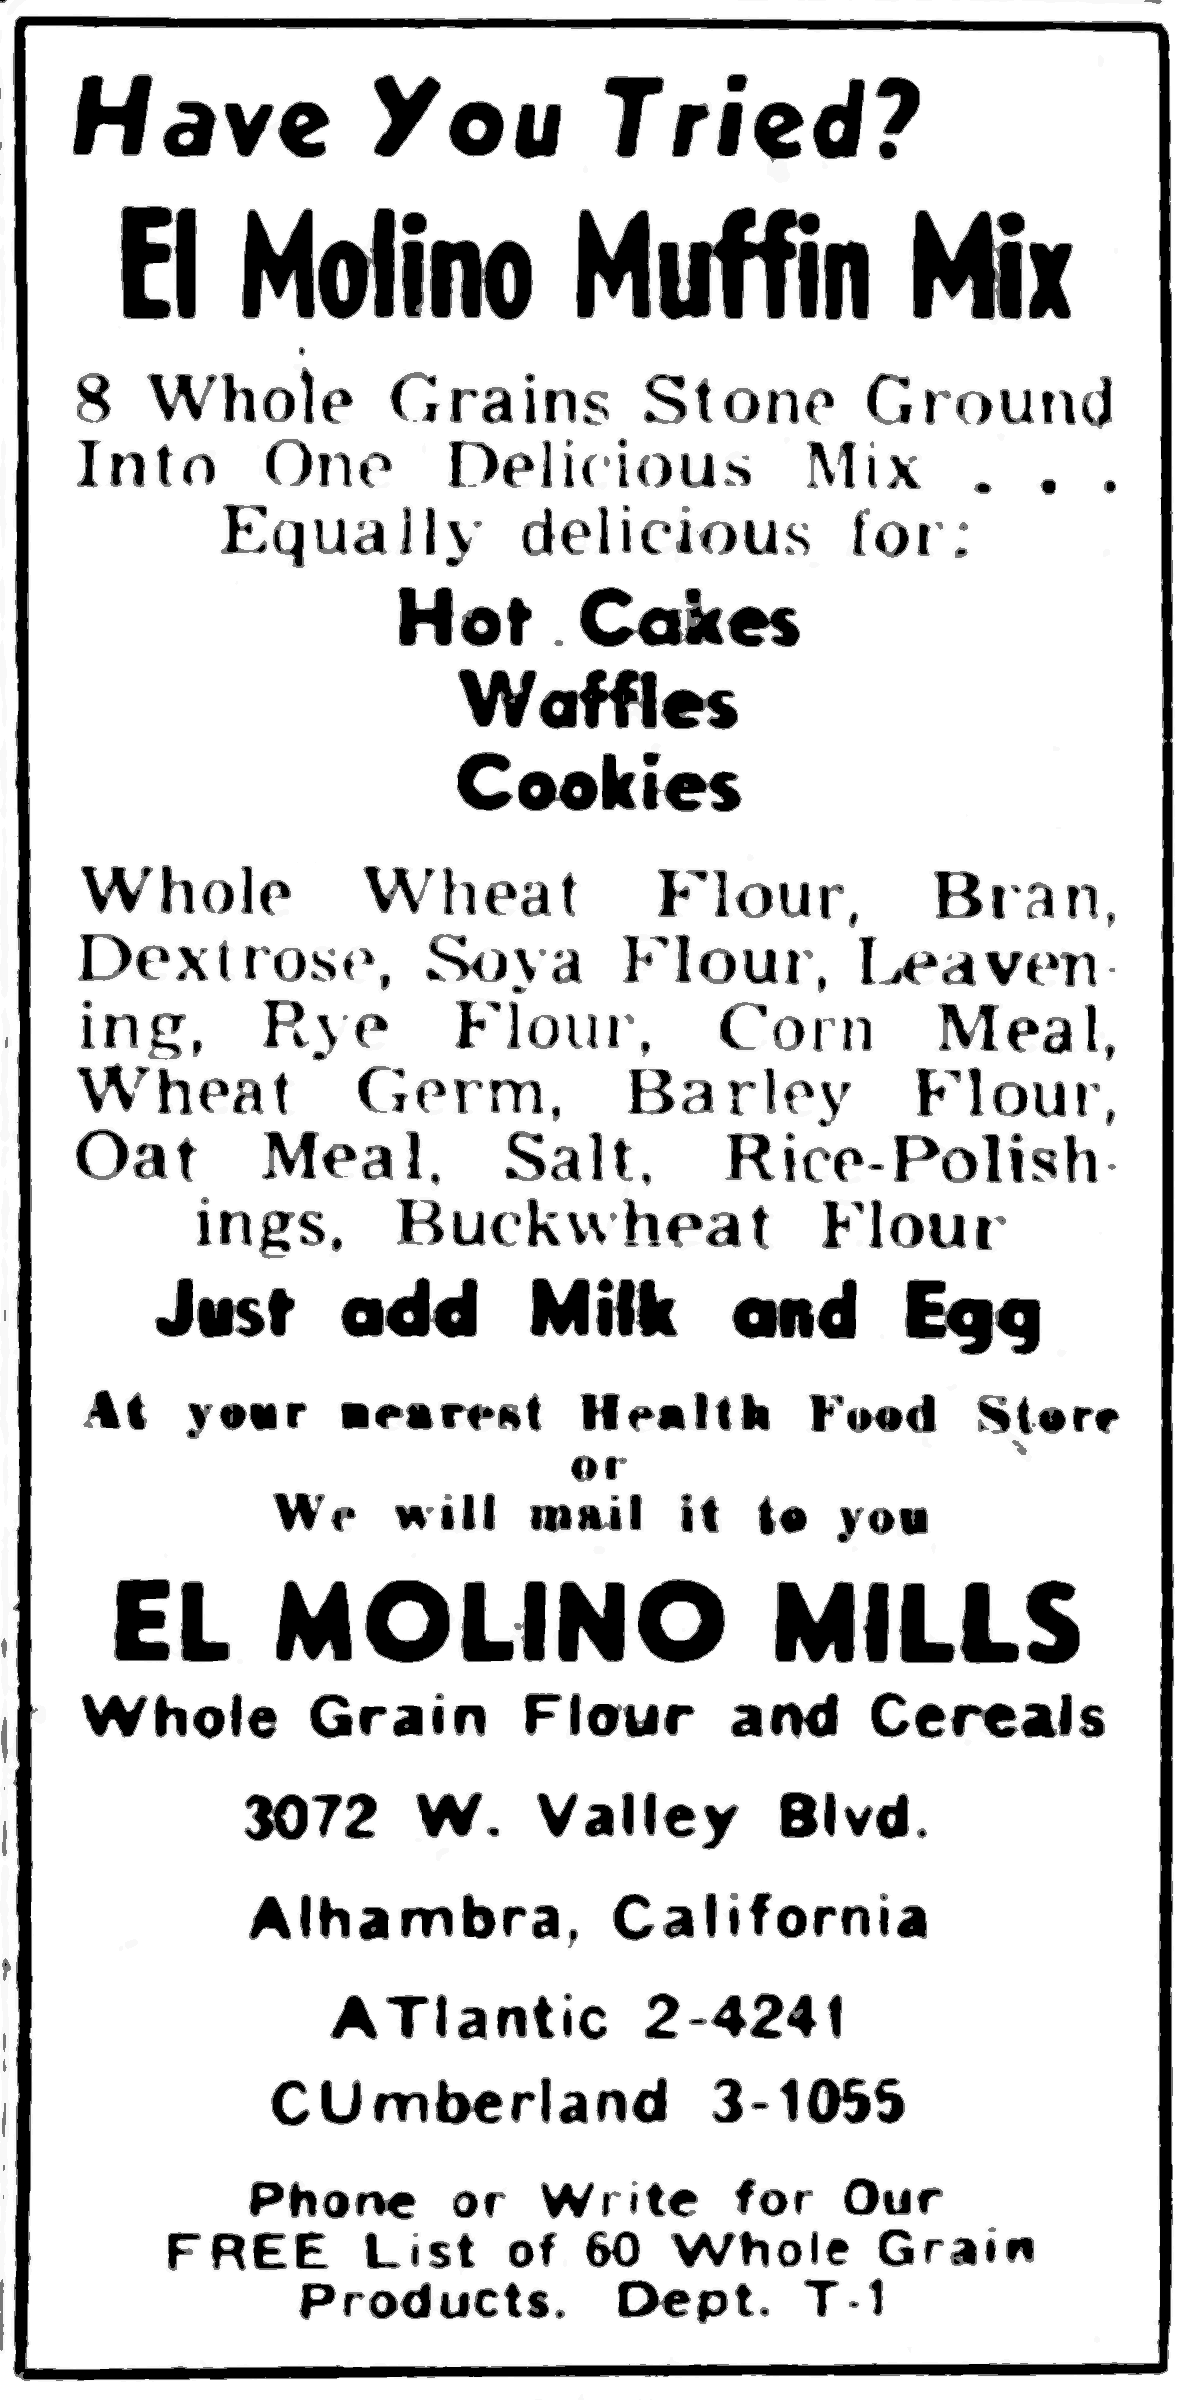 Have you tried El Molino?: Have You Tried El Molino Muffin Mix? From the Los Angeles Tidings, May 27, 1949, page 13.; muffins; El Molino Mills